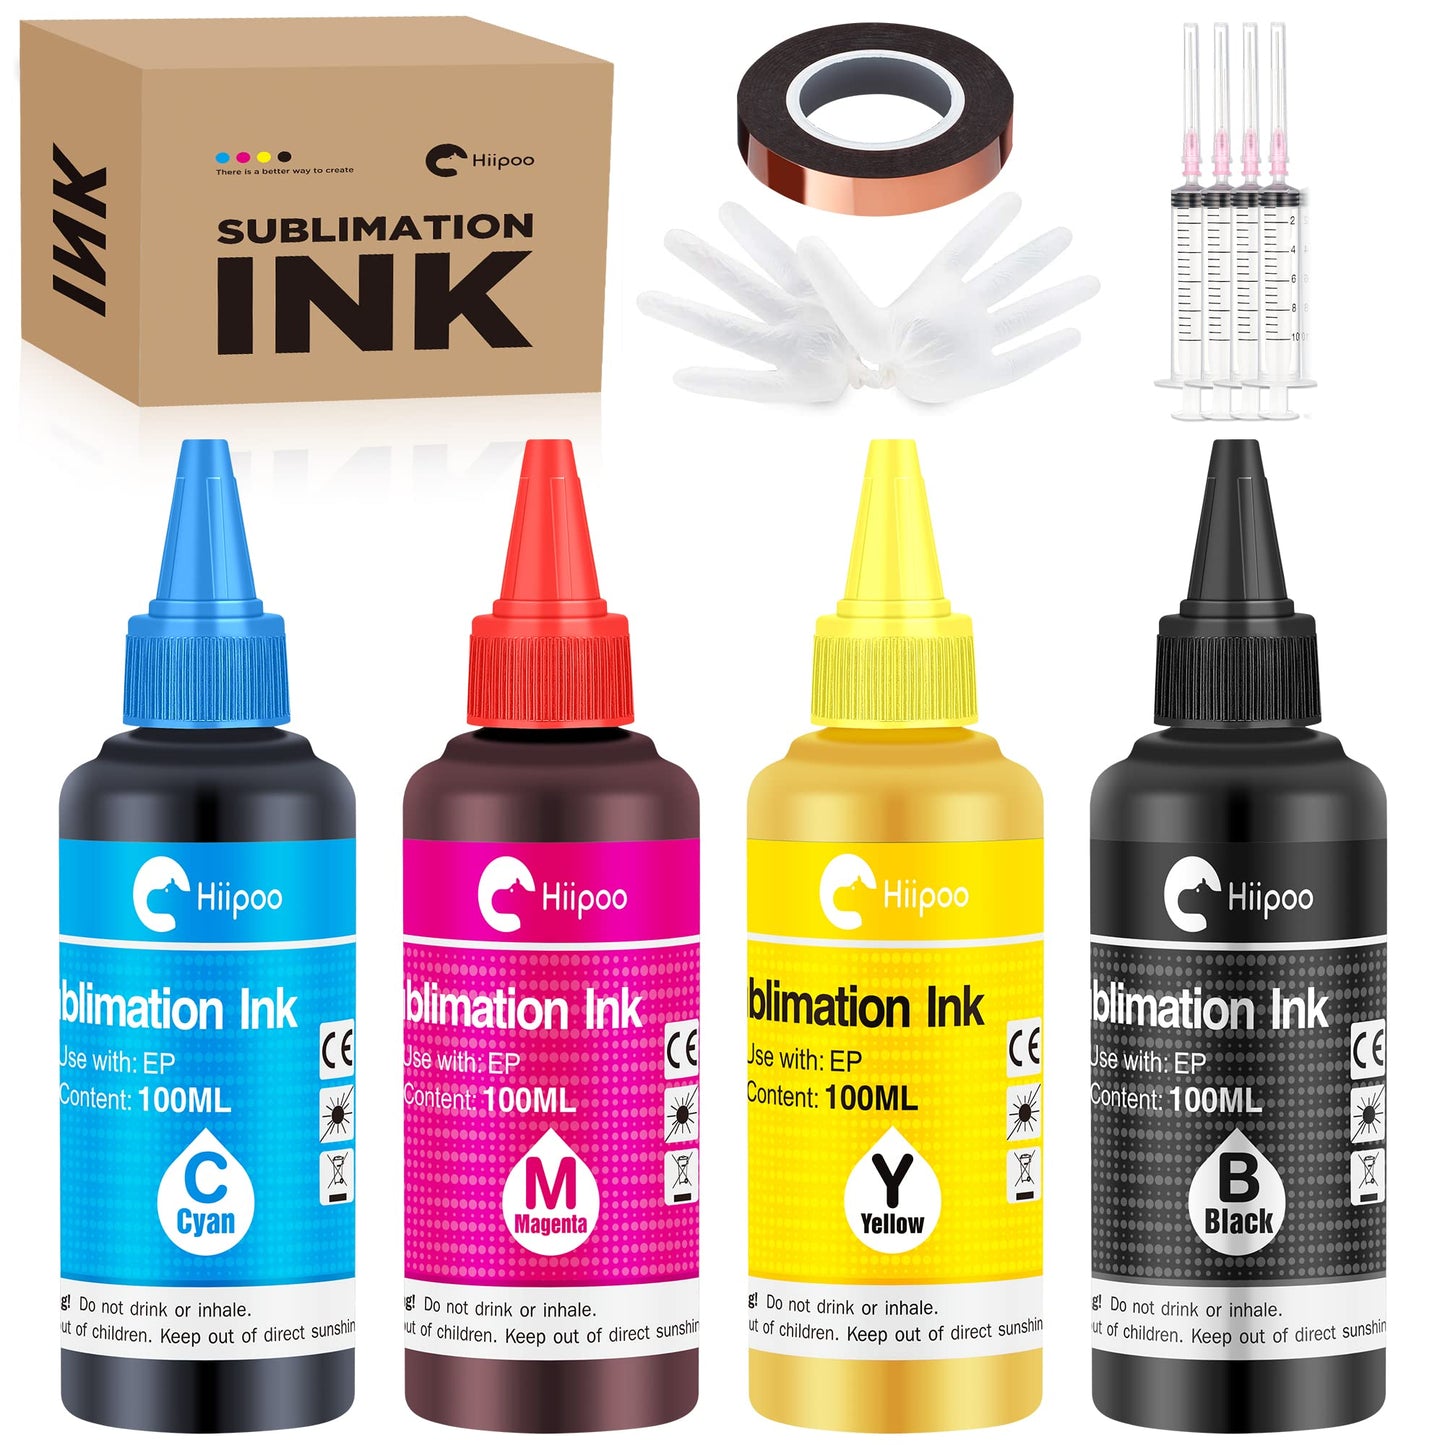 Hiipoo Sublimation Ink Refilled Bottles with Heat Tape Refill for ET2400 XP4105 XP4100 ET2720 ET2760 ET2750 ET4800 ET-2800 ET-2803 ET-2850 Inkjet